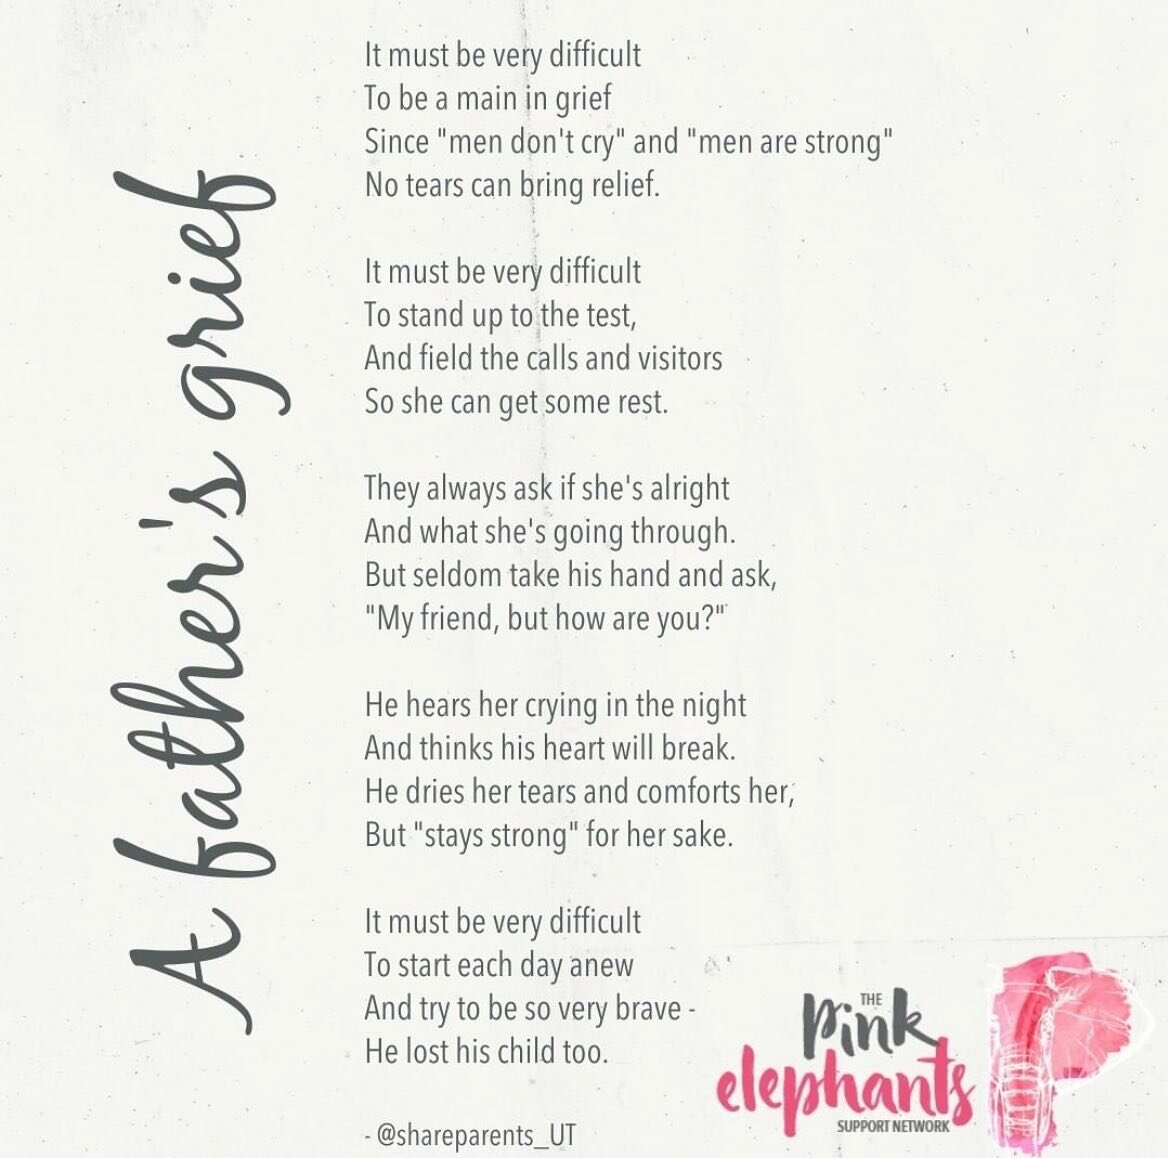 Today is Bereaved Father&rsquo;s Day. 

Hug your partners, your brothers, your fathers. They grieve too. 

I don&rsquo;t have words today, so I&rsquo;m sharing this poem from @pinkelephantssupport ❤️